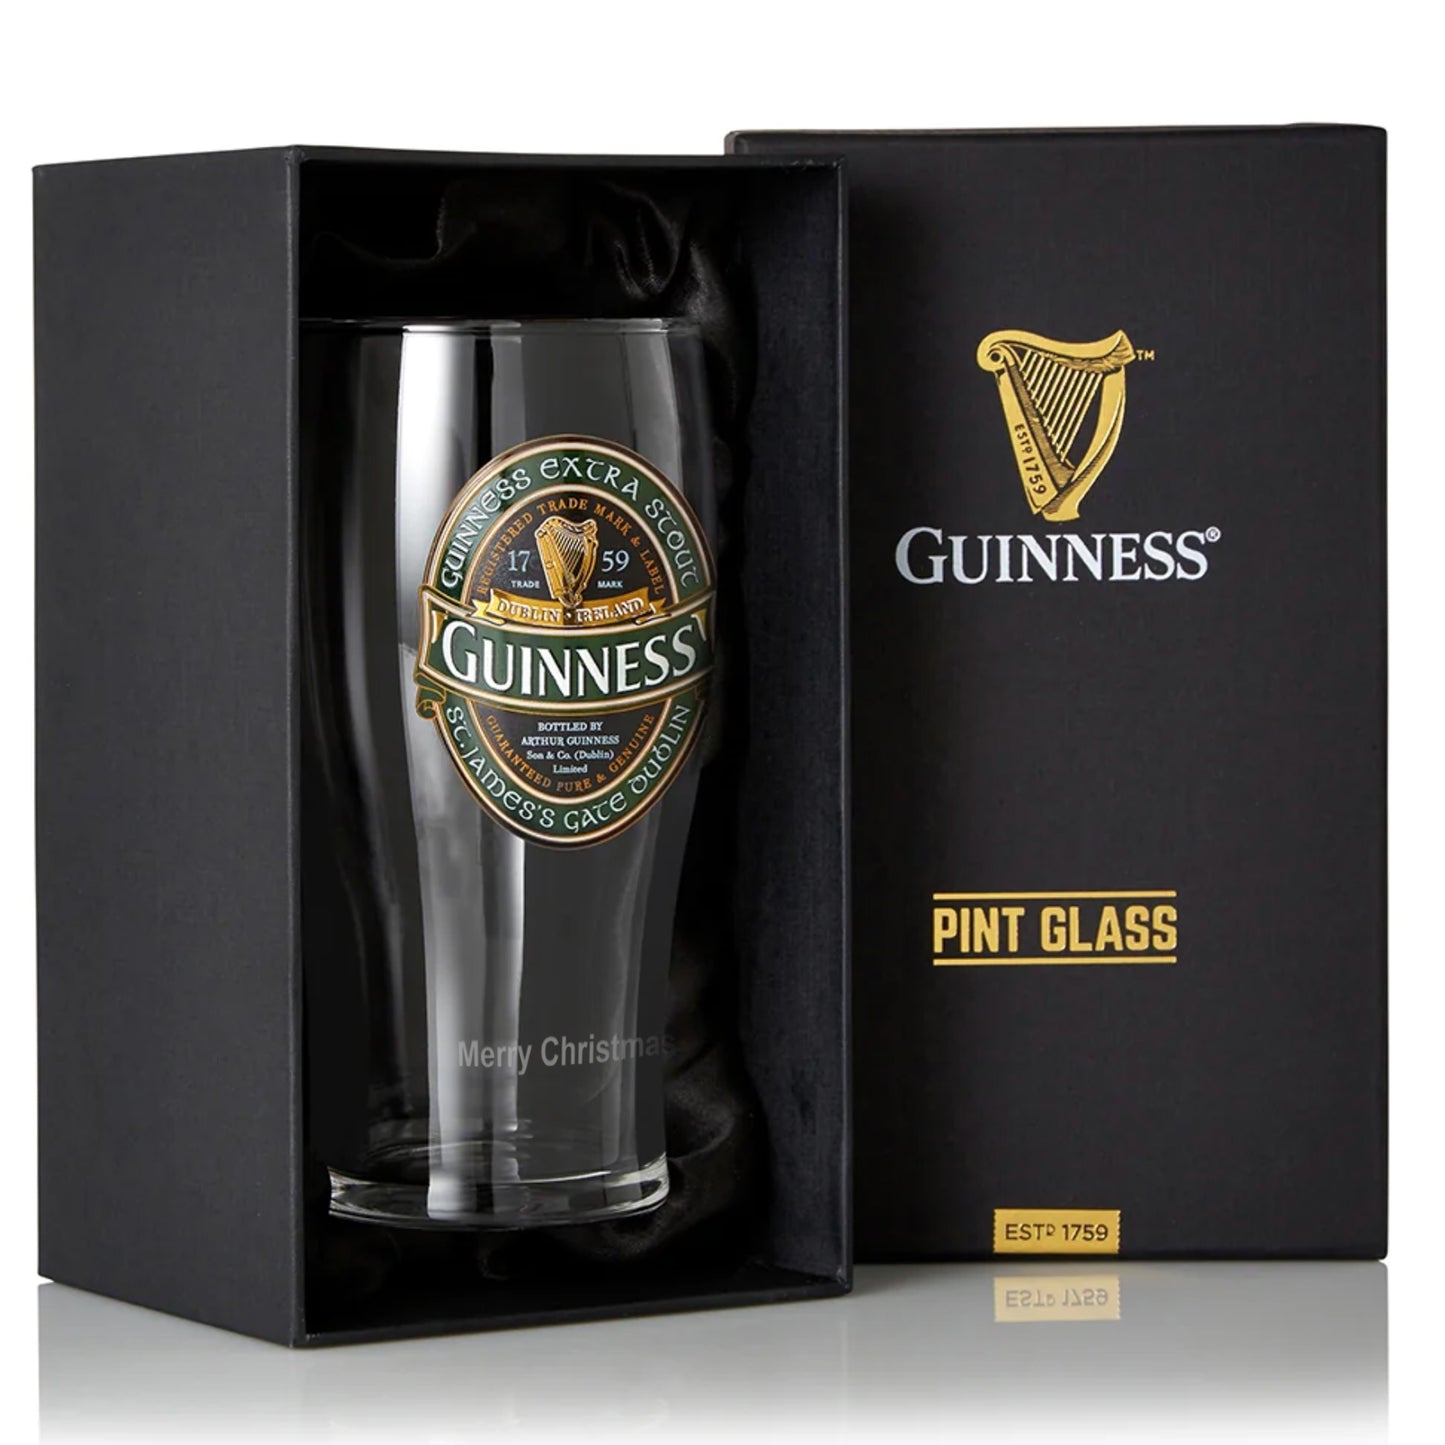 Guinness Ireland Collection Guinness pint glass in a box.